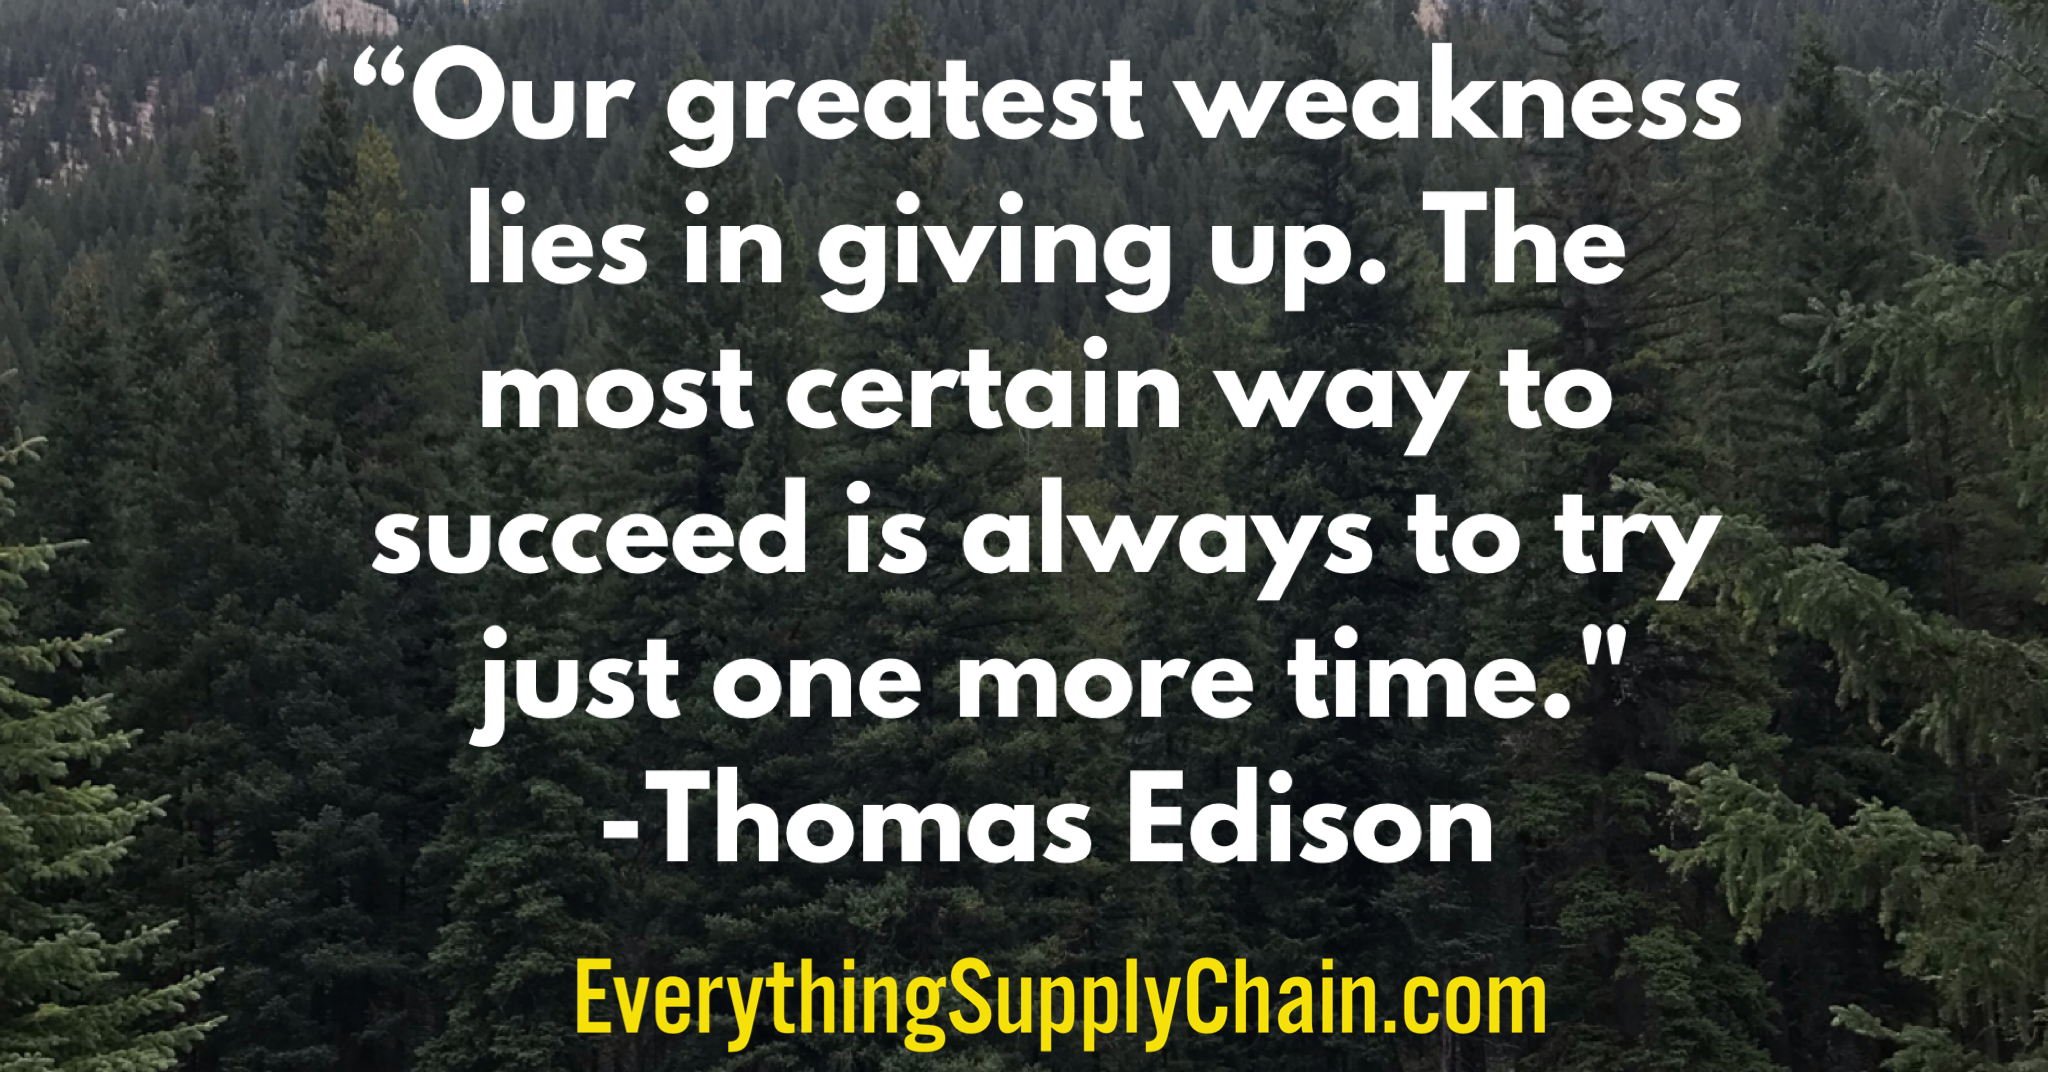 Thomas A. Edison quote: The greatest invention in the world is the